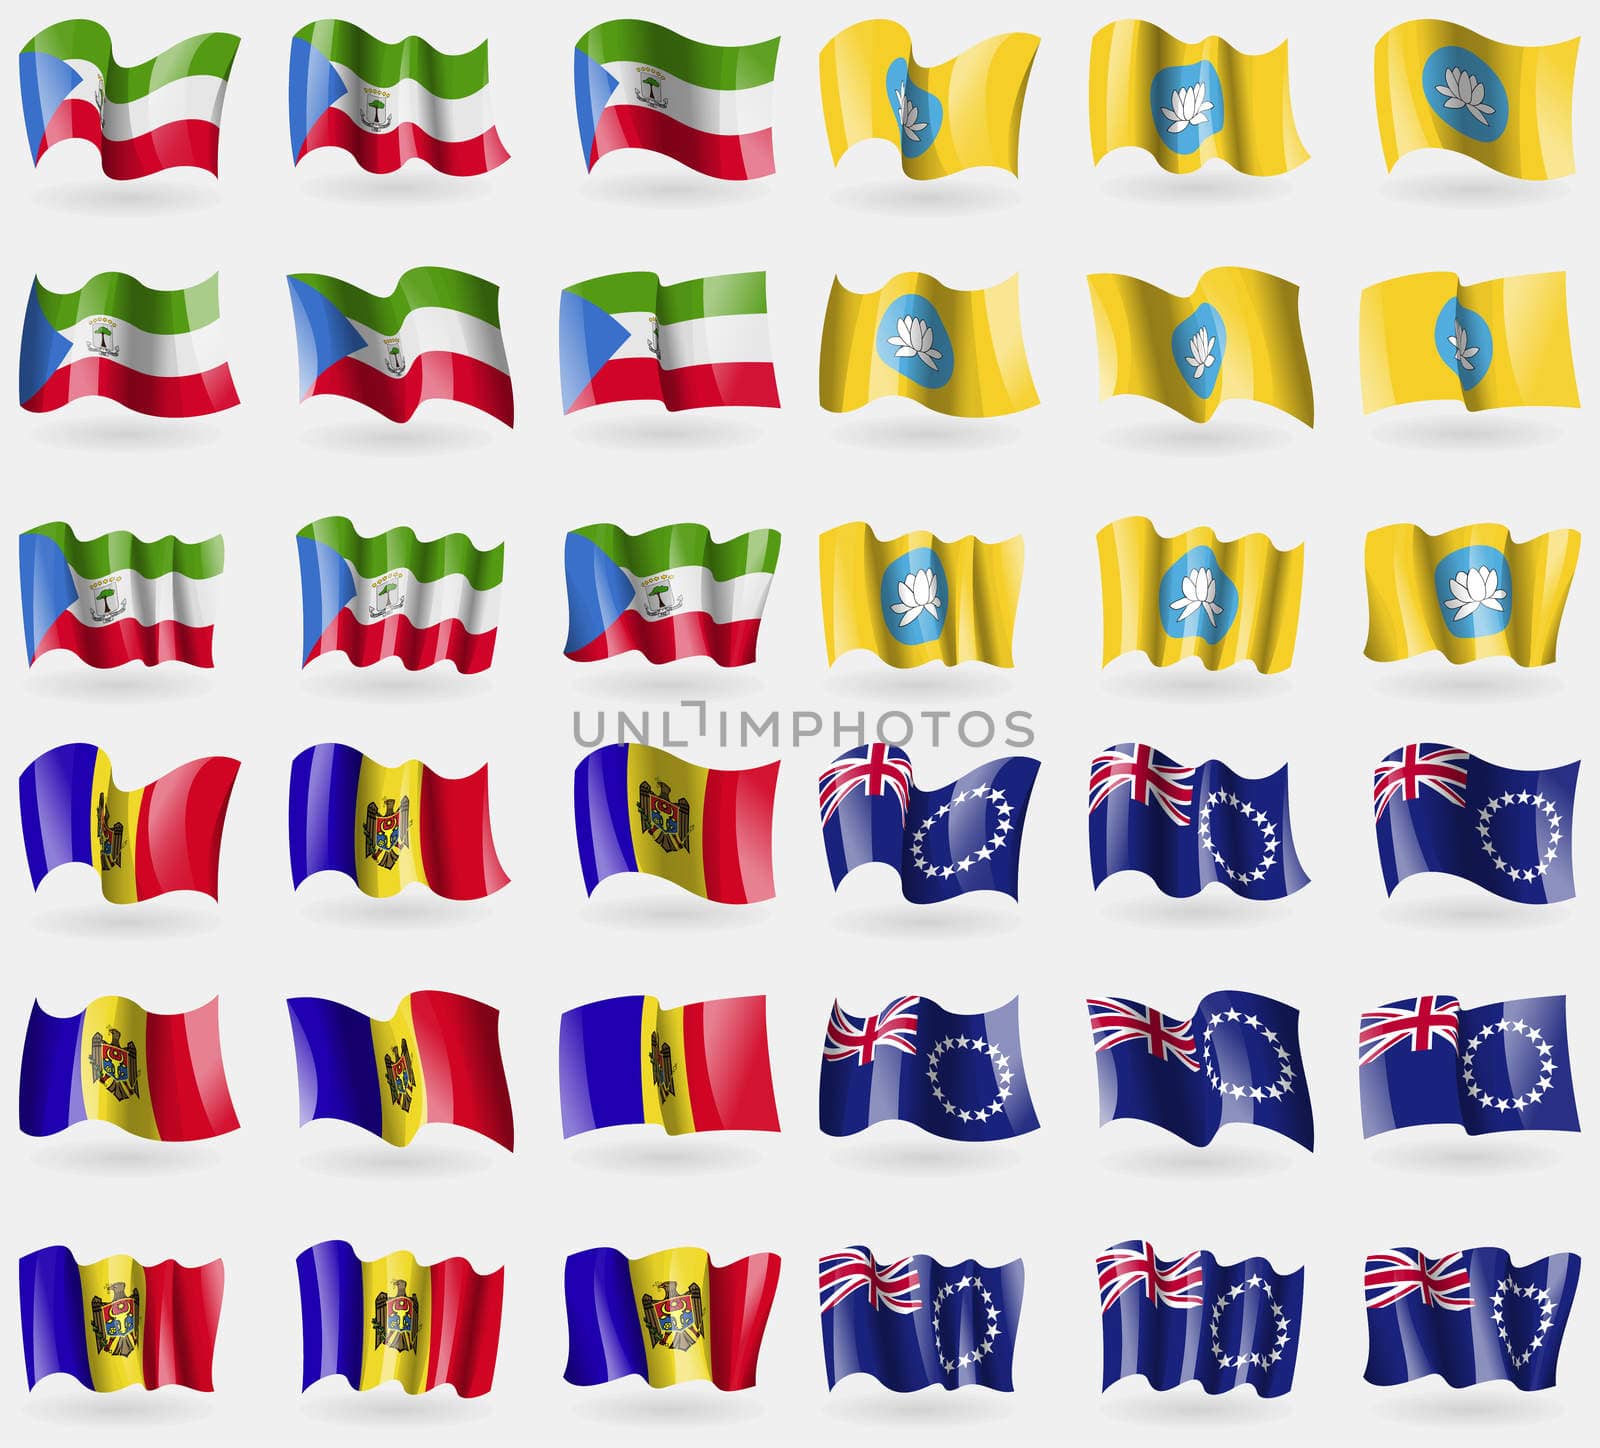 Equatorial Guinea, Kamykia, Moldova, Cook Islands. Set of 36 flags of the countries of the world. illustration